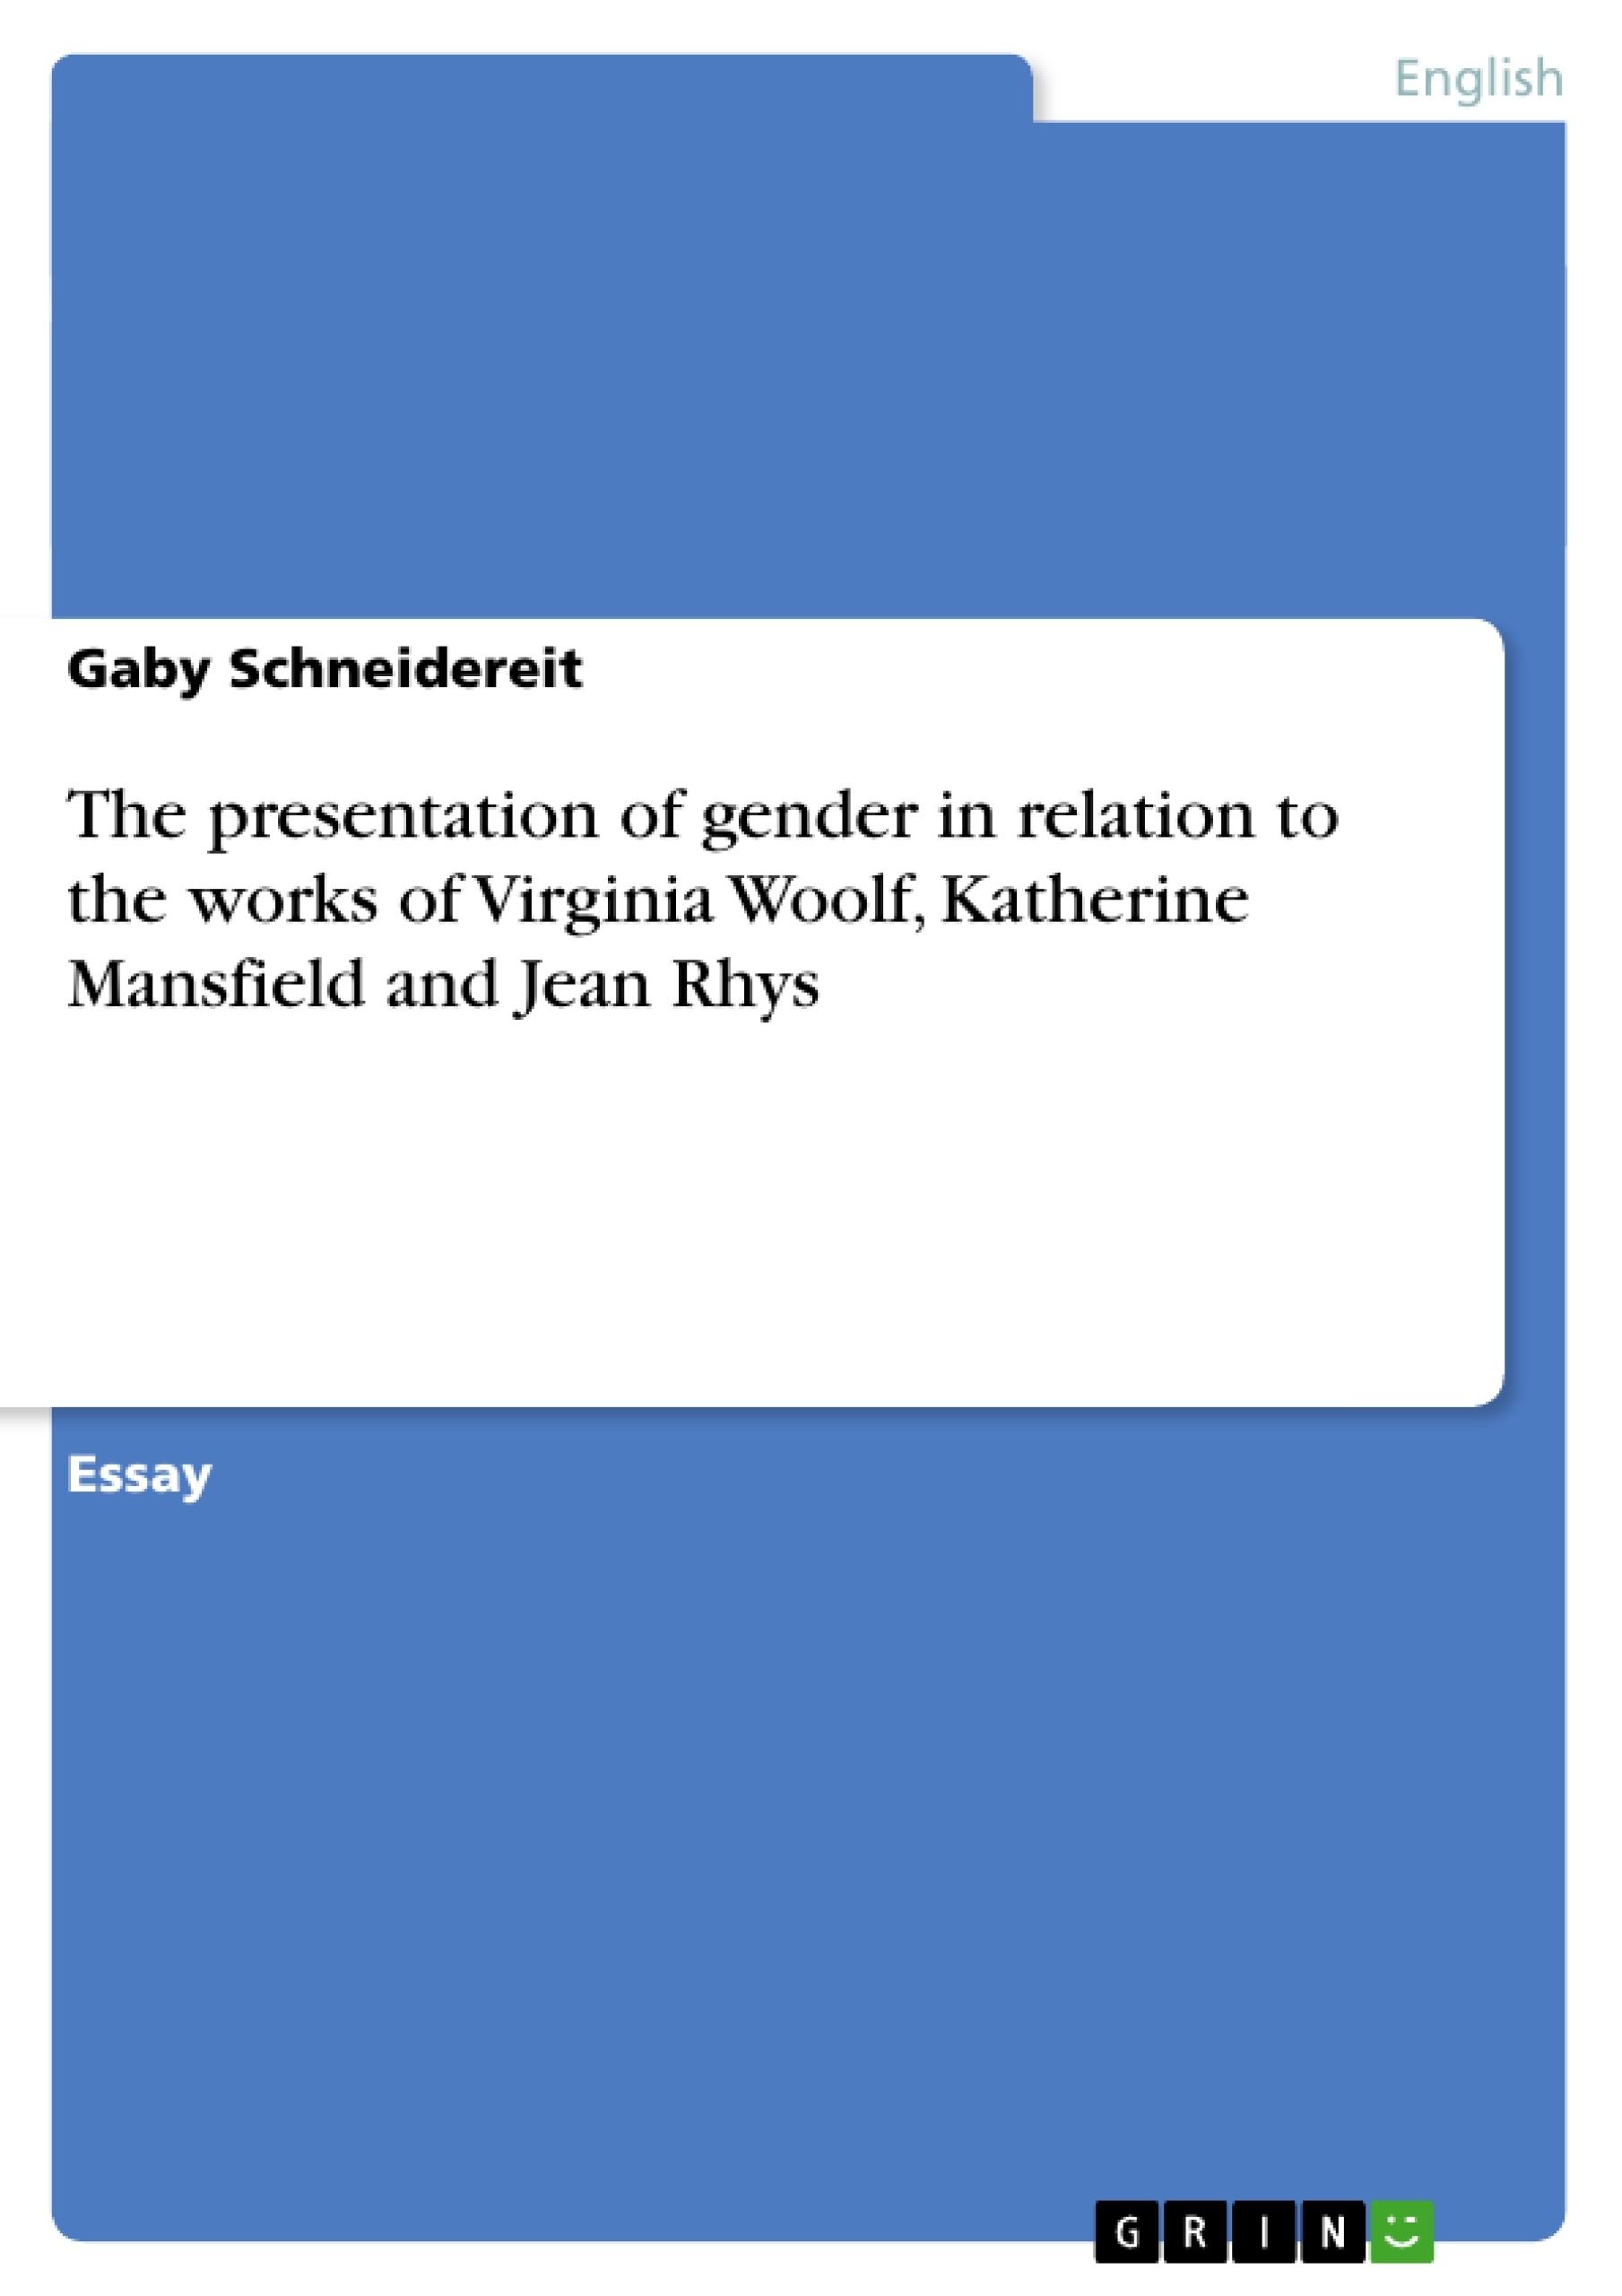 Title: The presentation of gender in relation to the works of Virginia Woolf, Katherine Mansfield and Jean Rhys